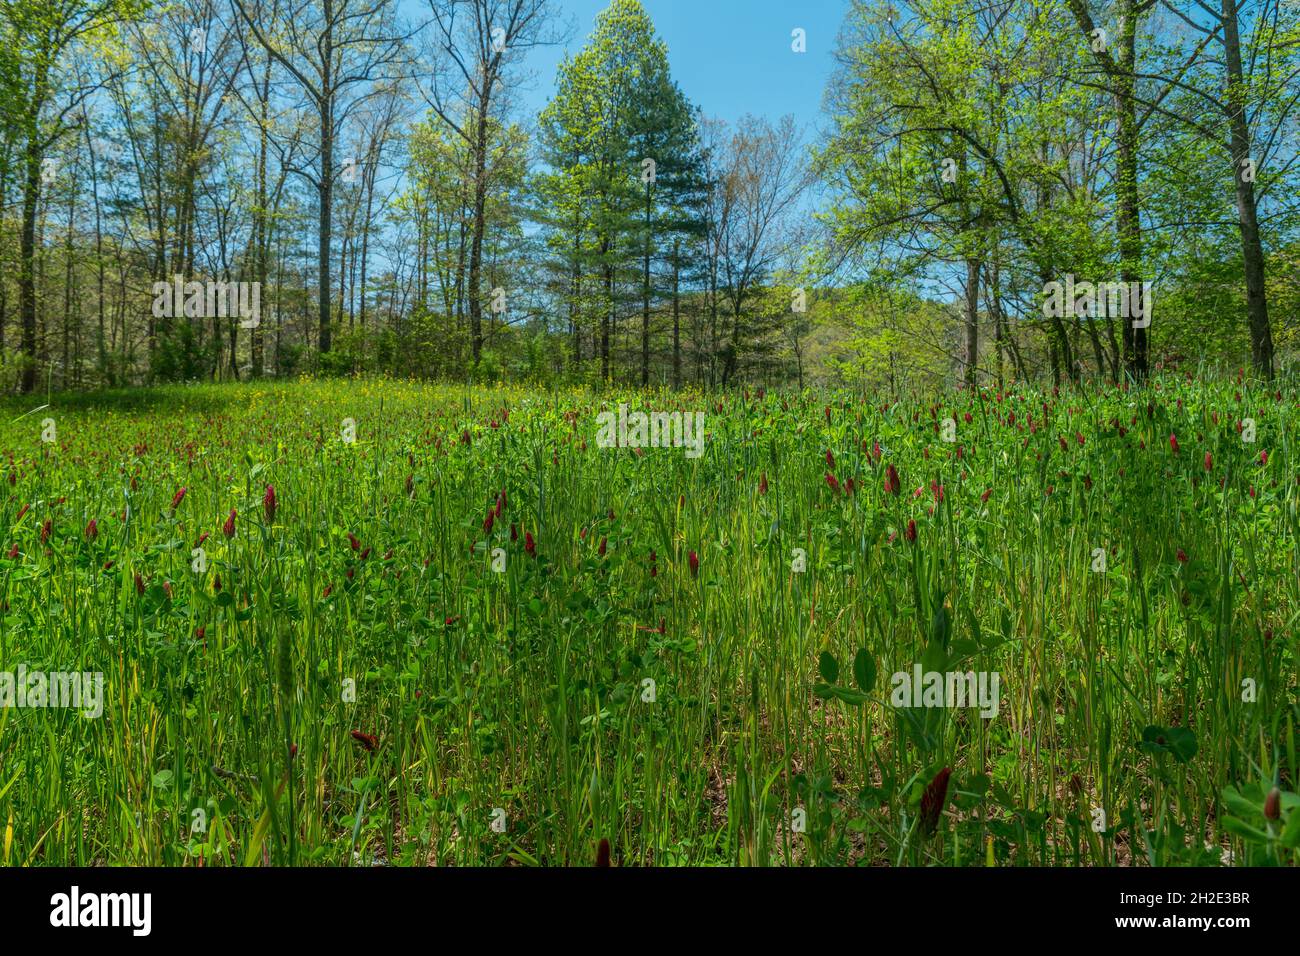 Closeup view of bright color crimson clover blooming in a field mixed with tall grasses with the woodlands in the background in early spring Stock Photo